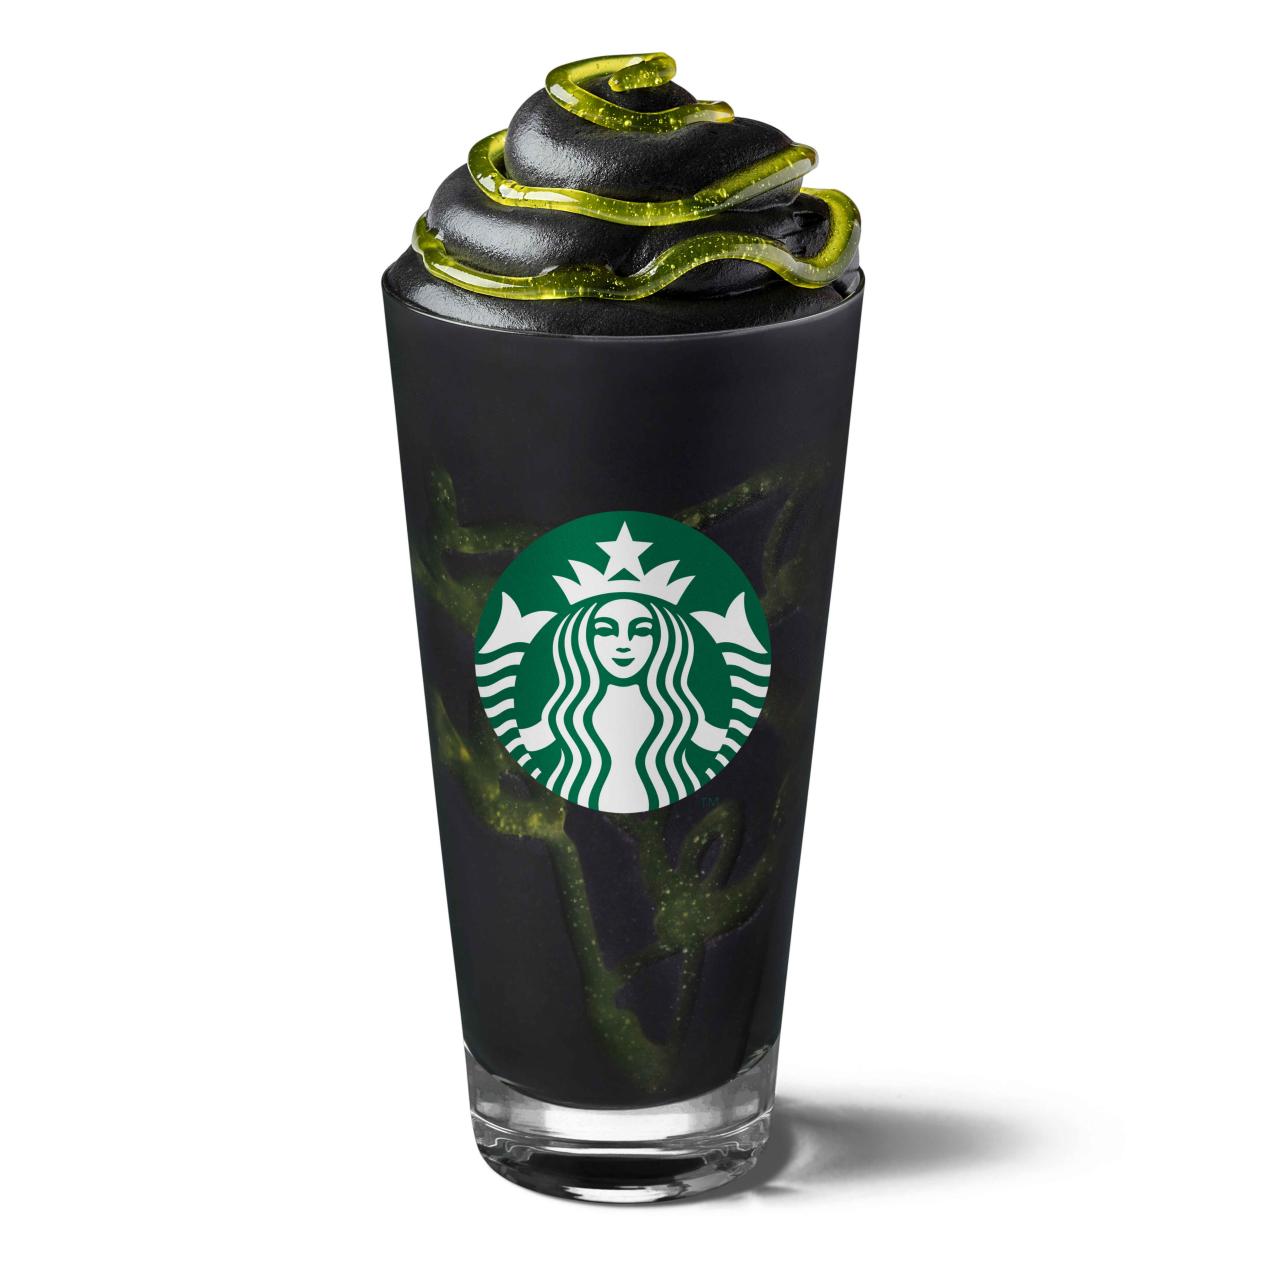 Starbucks Just Set The Tone For Spooky Season With Its Limited Edition  Halloween Cups